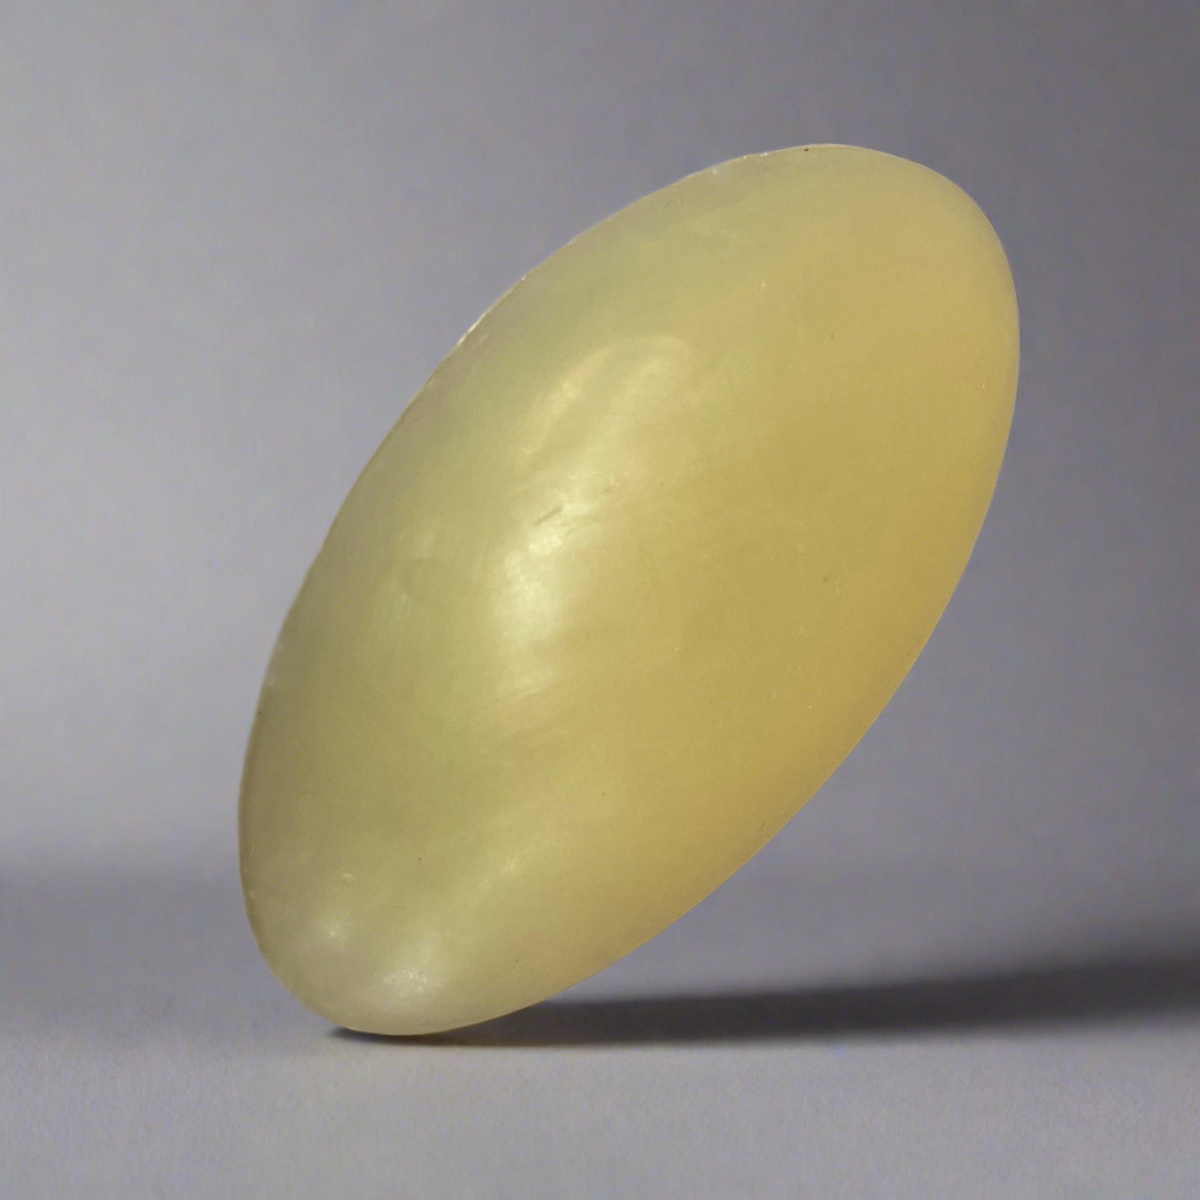 A Bioluminescence Hemp & Argan Oil Facial Bar in a contour shape, designed to fit comfortably in the hand